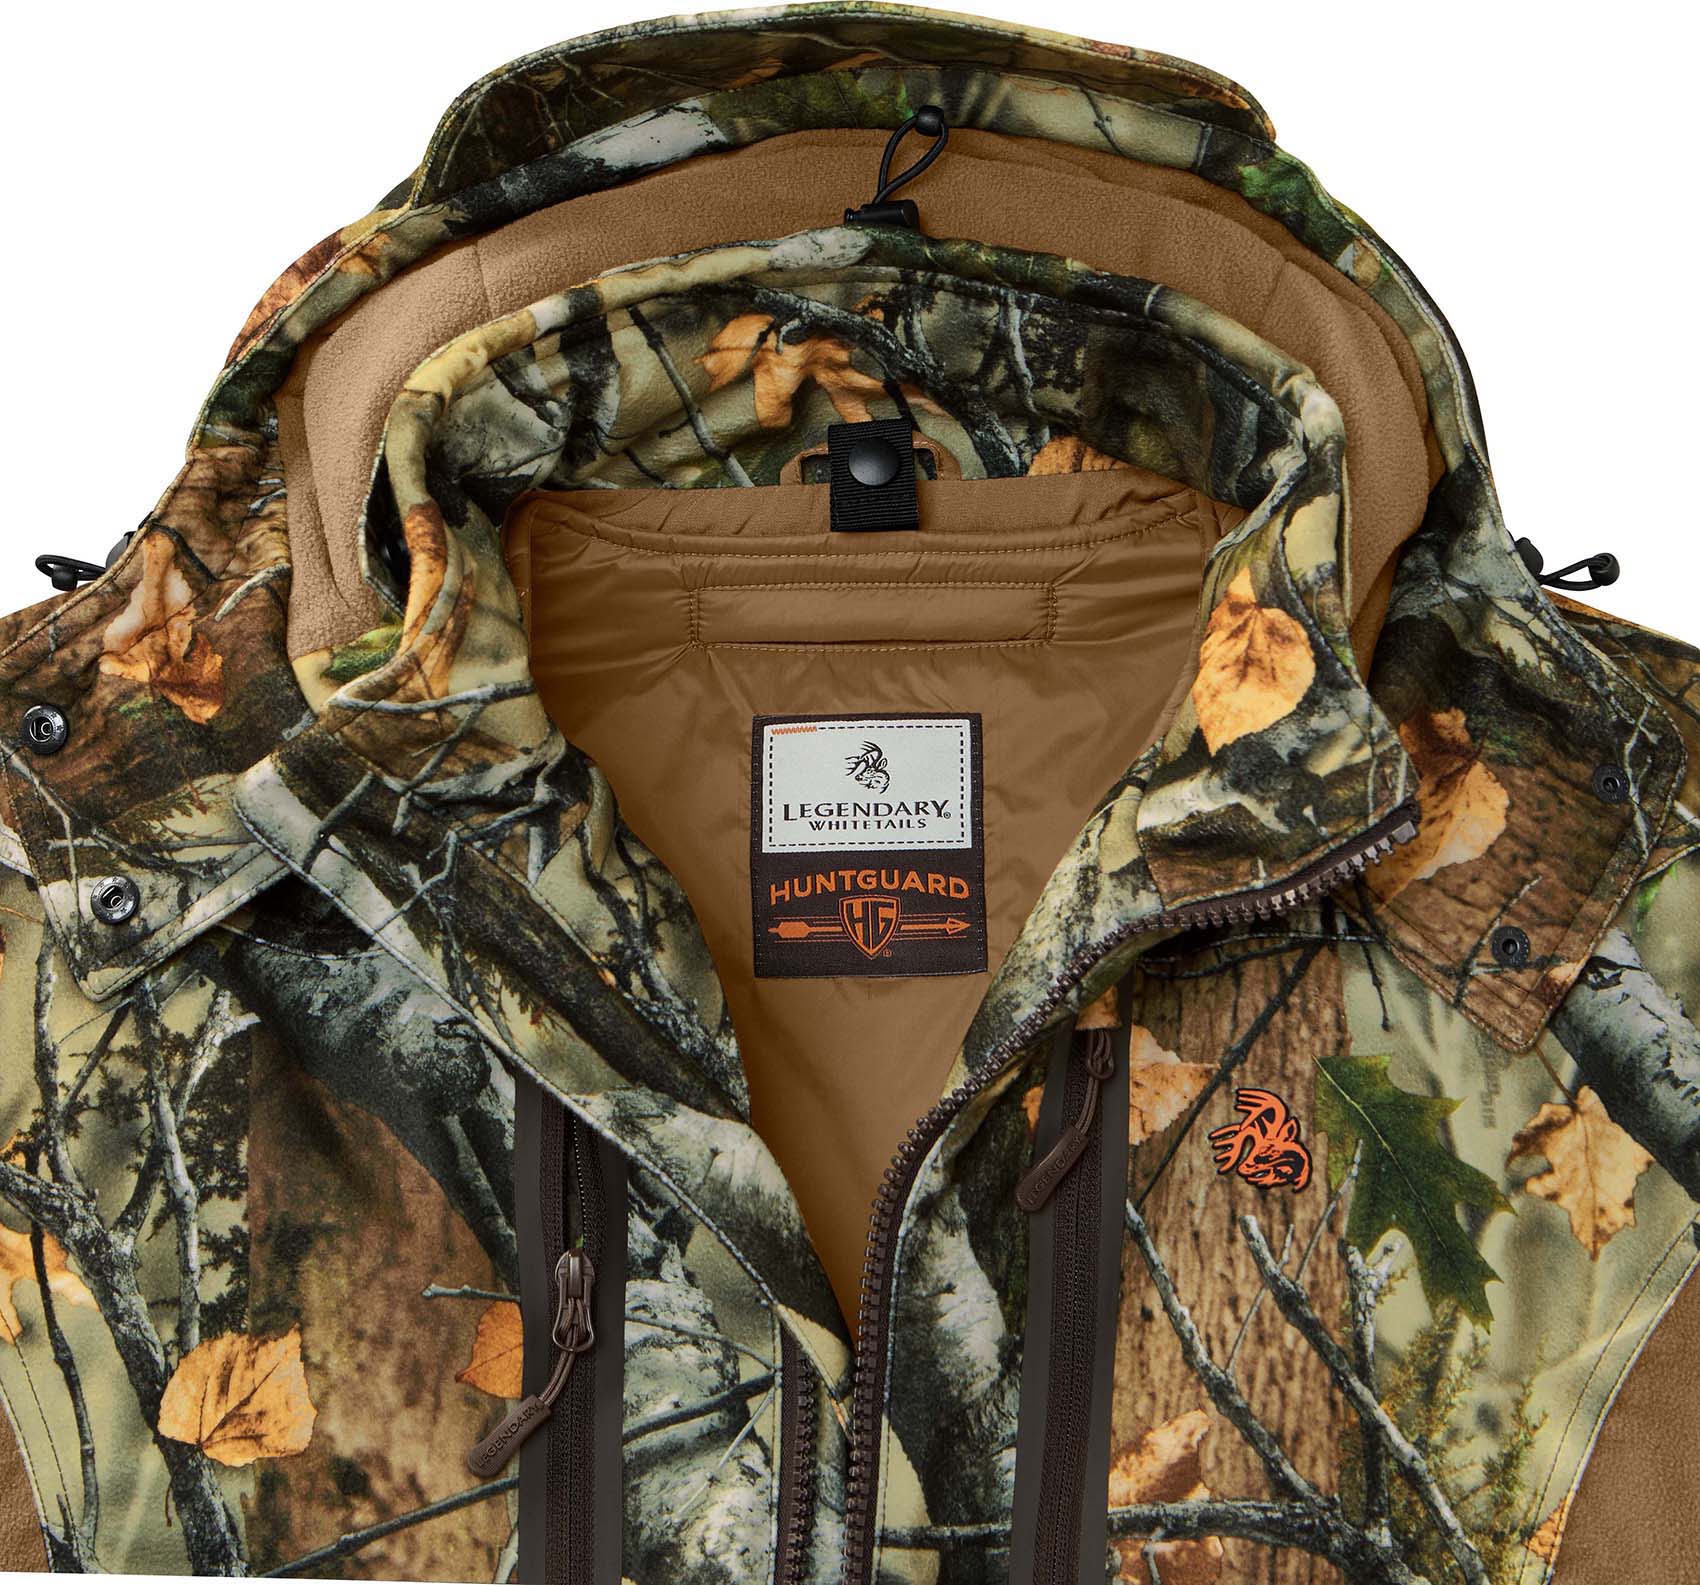 Whitetail Clothing, Hunting Gear & Camo